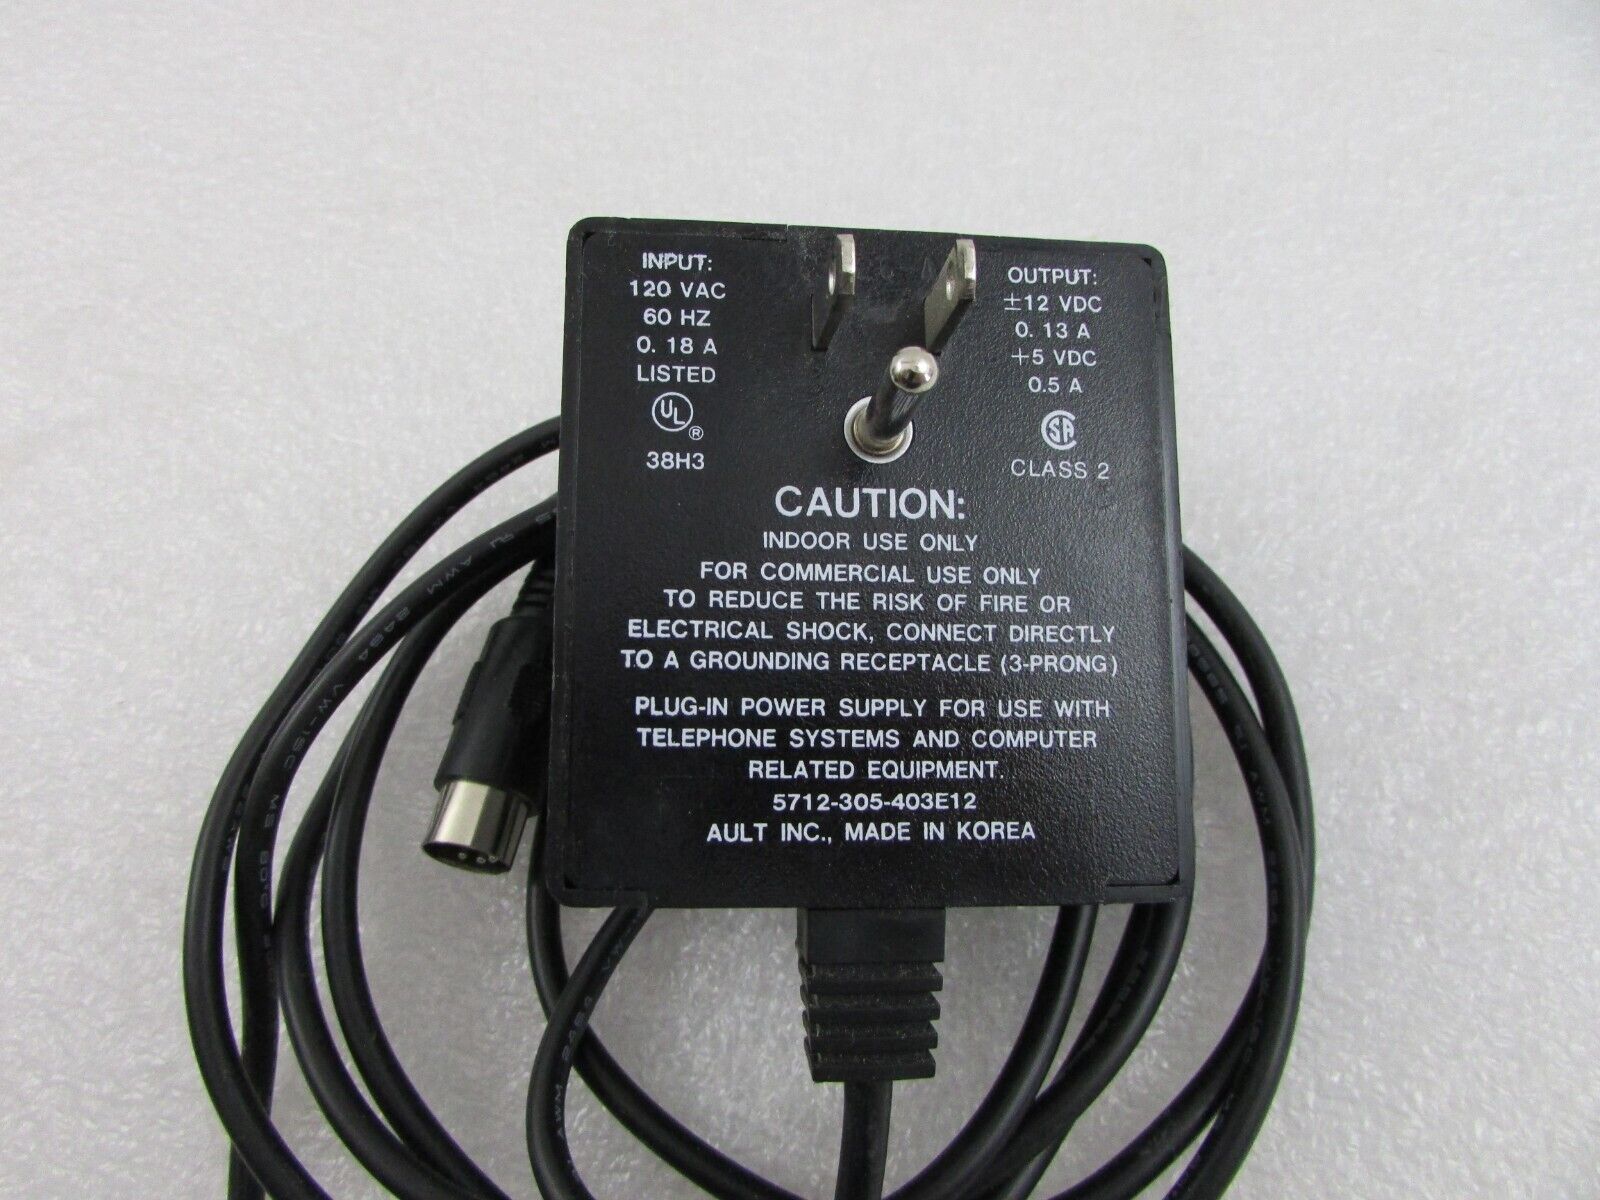 *Brand NEW* AULT 5712-305-403E12 12V AC Adapter For Use With Tele/Comp Systems Power Supply